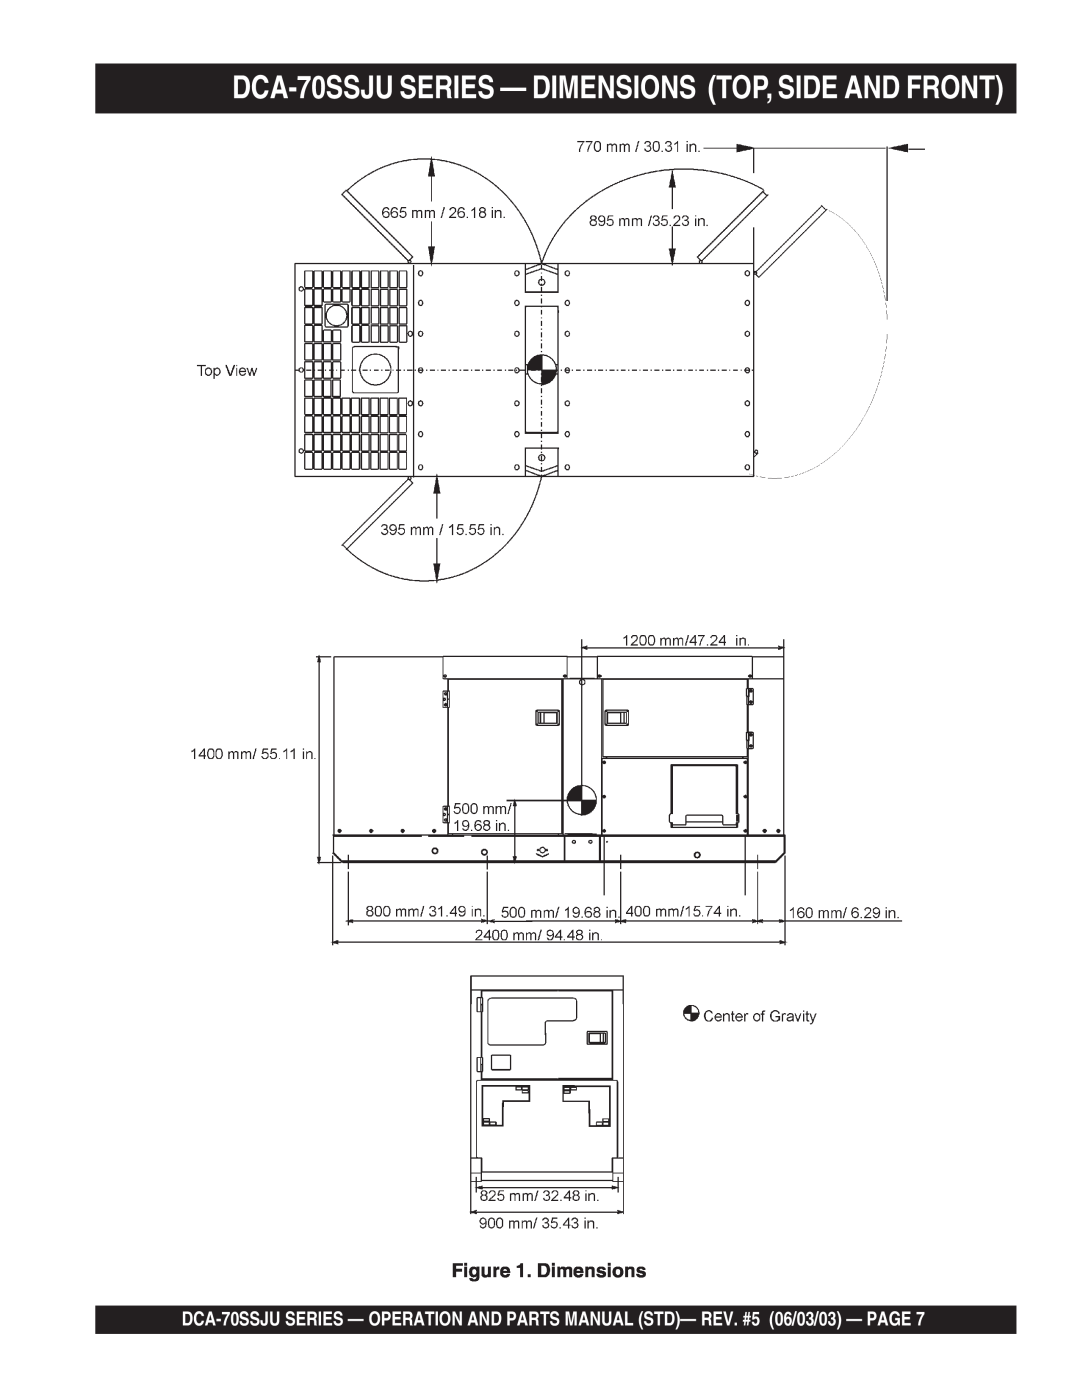 Multiquip operation manual DCA-70SSJUSERIES — DIMENSIONS TOP, SIDE AND FRONT, Dimensions 